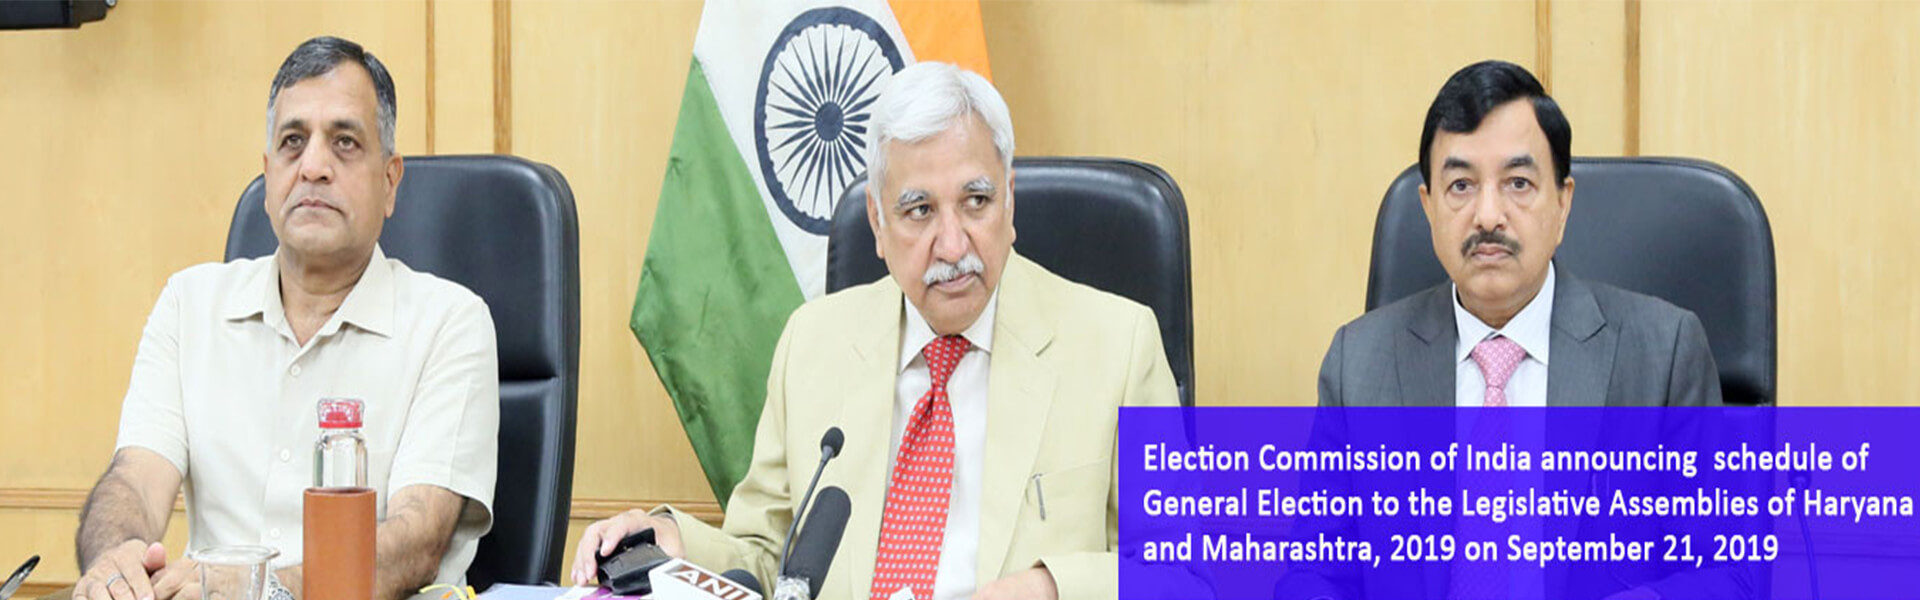 Election commission of india annouching schedule of general election